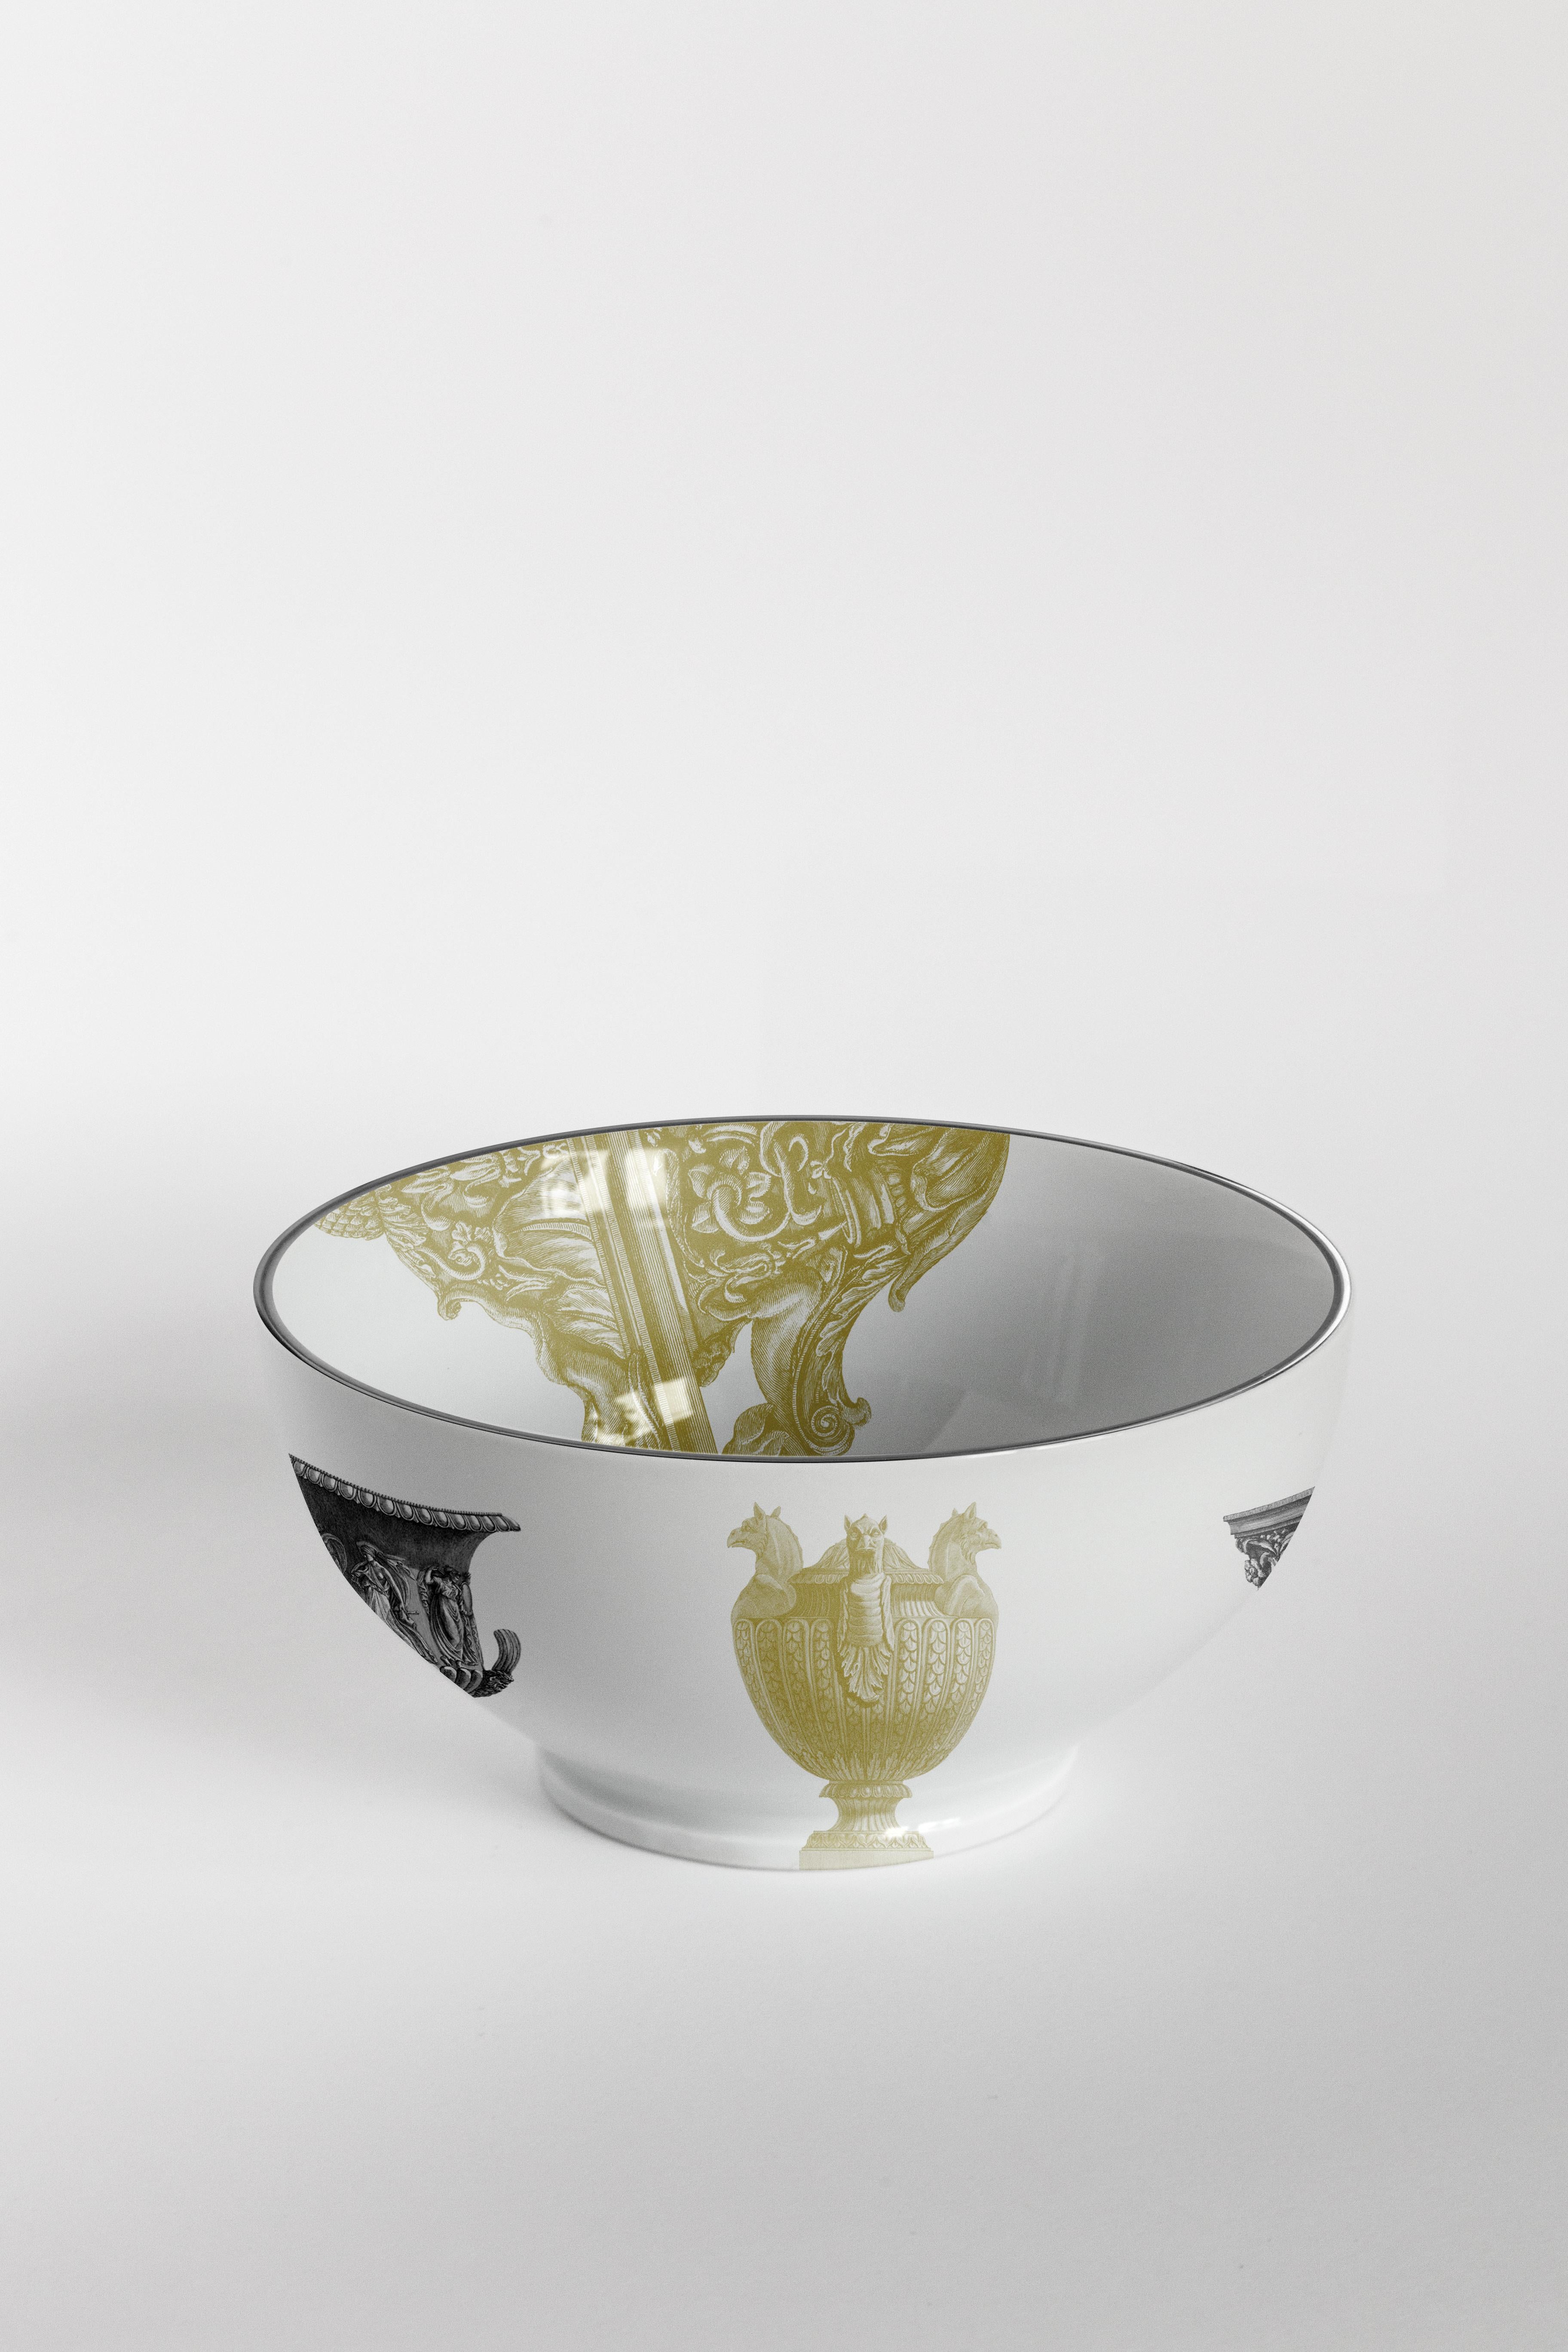 Roma, Six Contemporary Porcelain bowls with Decorative Design For Sale 3